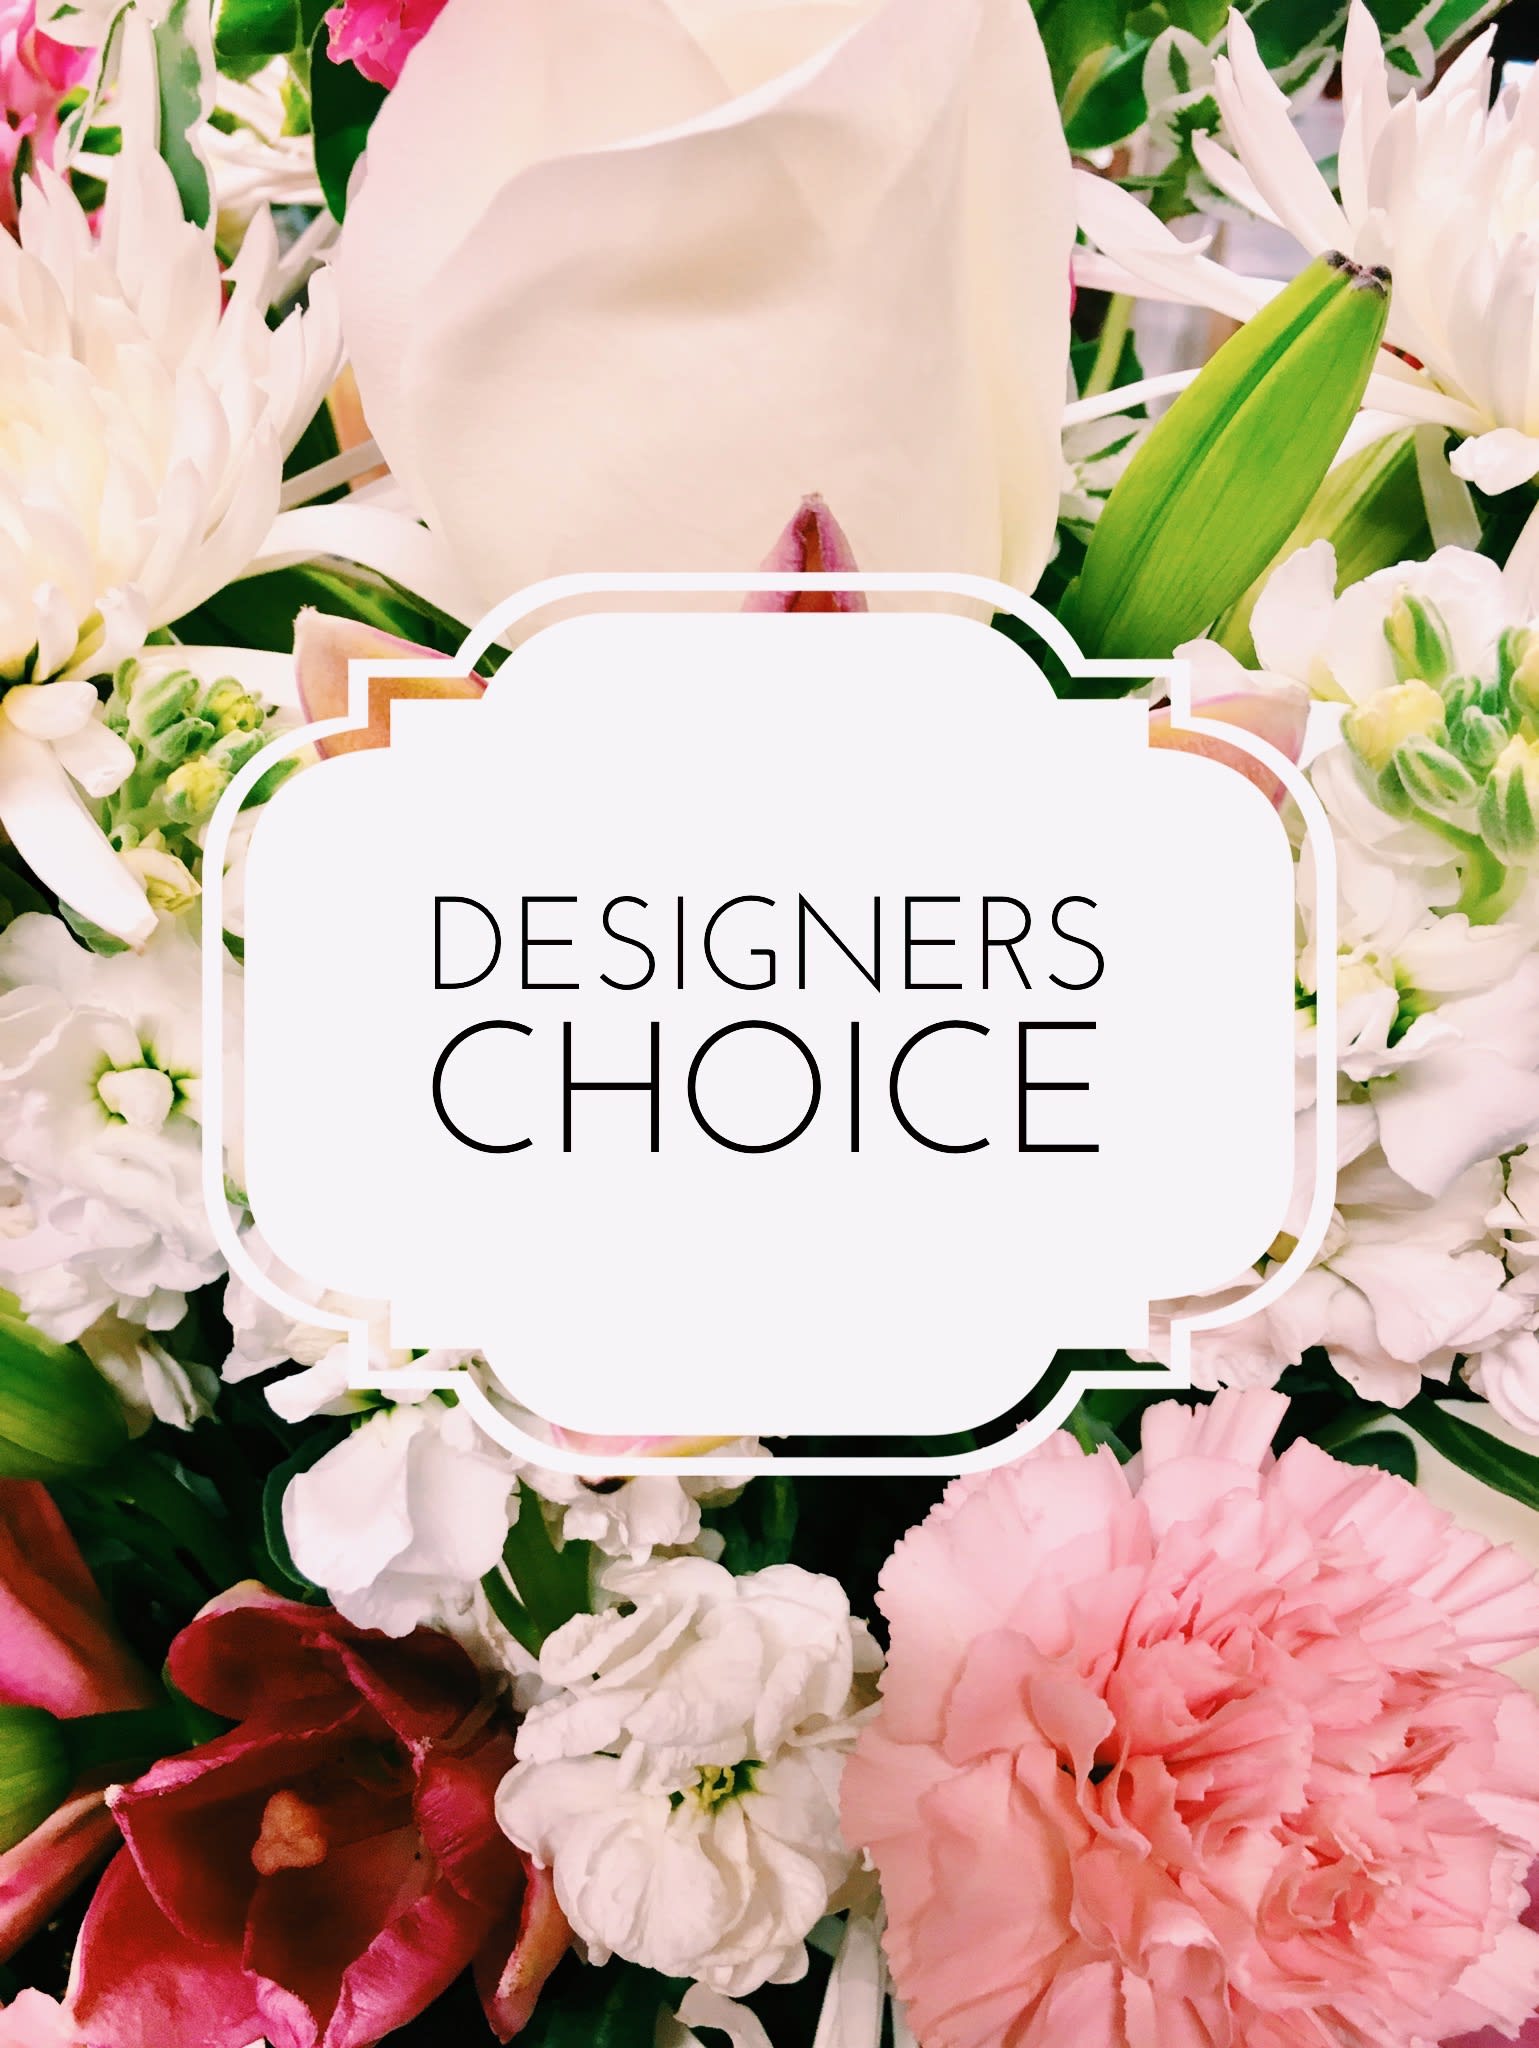 Designers Choice  - A florist designed fresh floral bouquet in a vase with assorted colors and flowers.